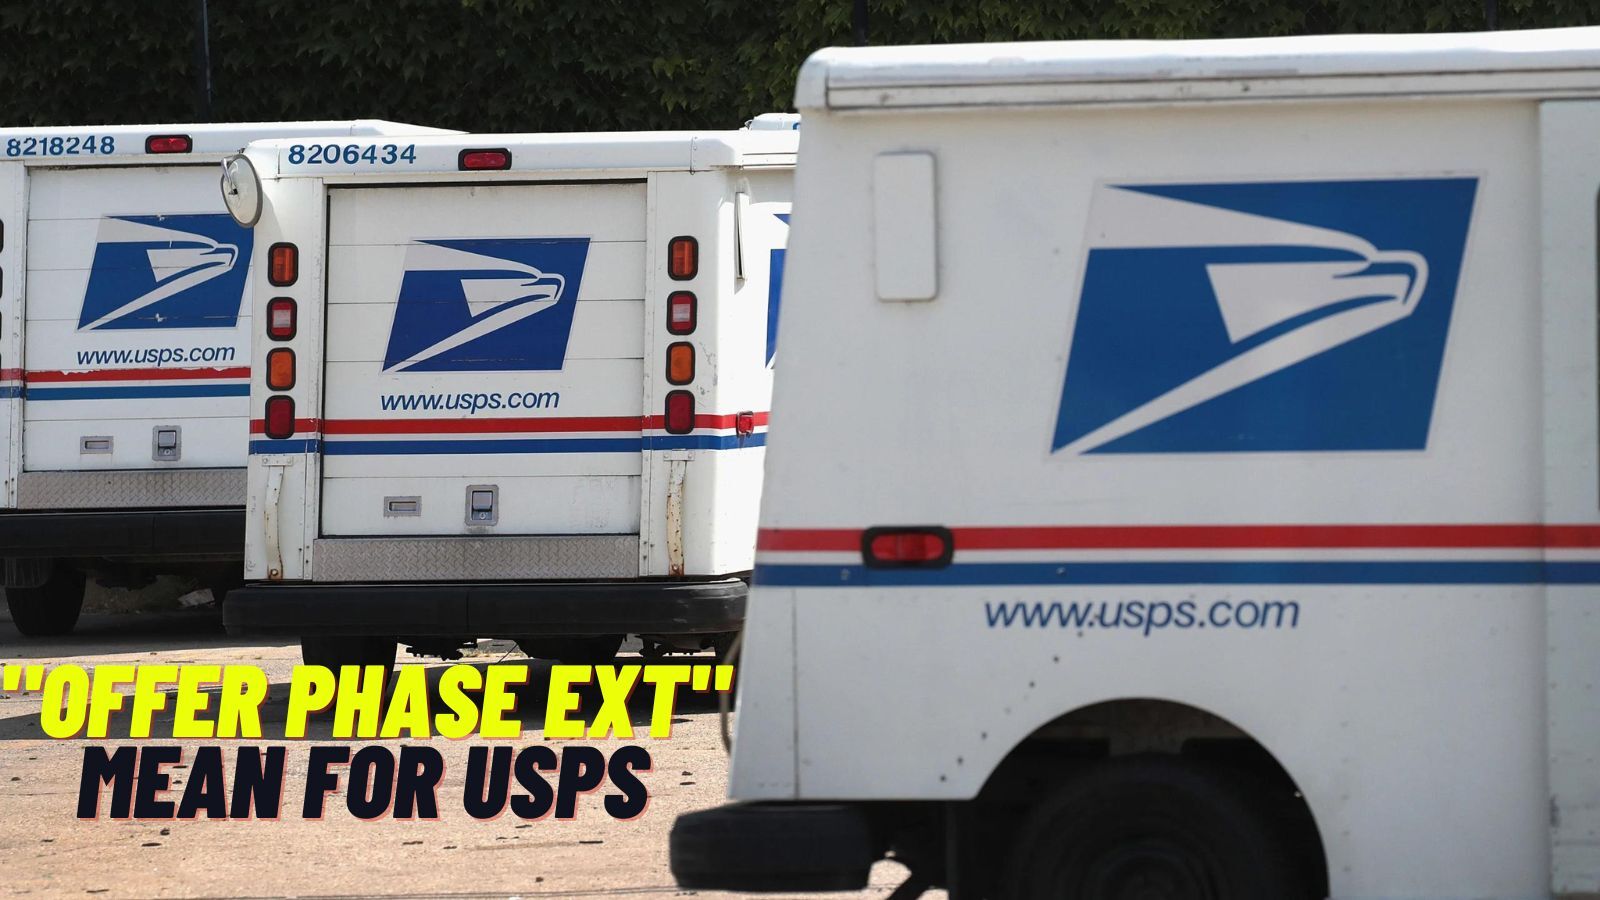 What Does "Offer Phase Ext" Mean for USPS? (Something Important)